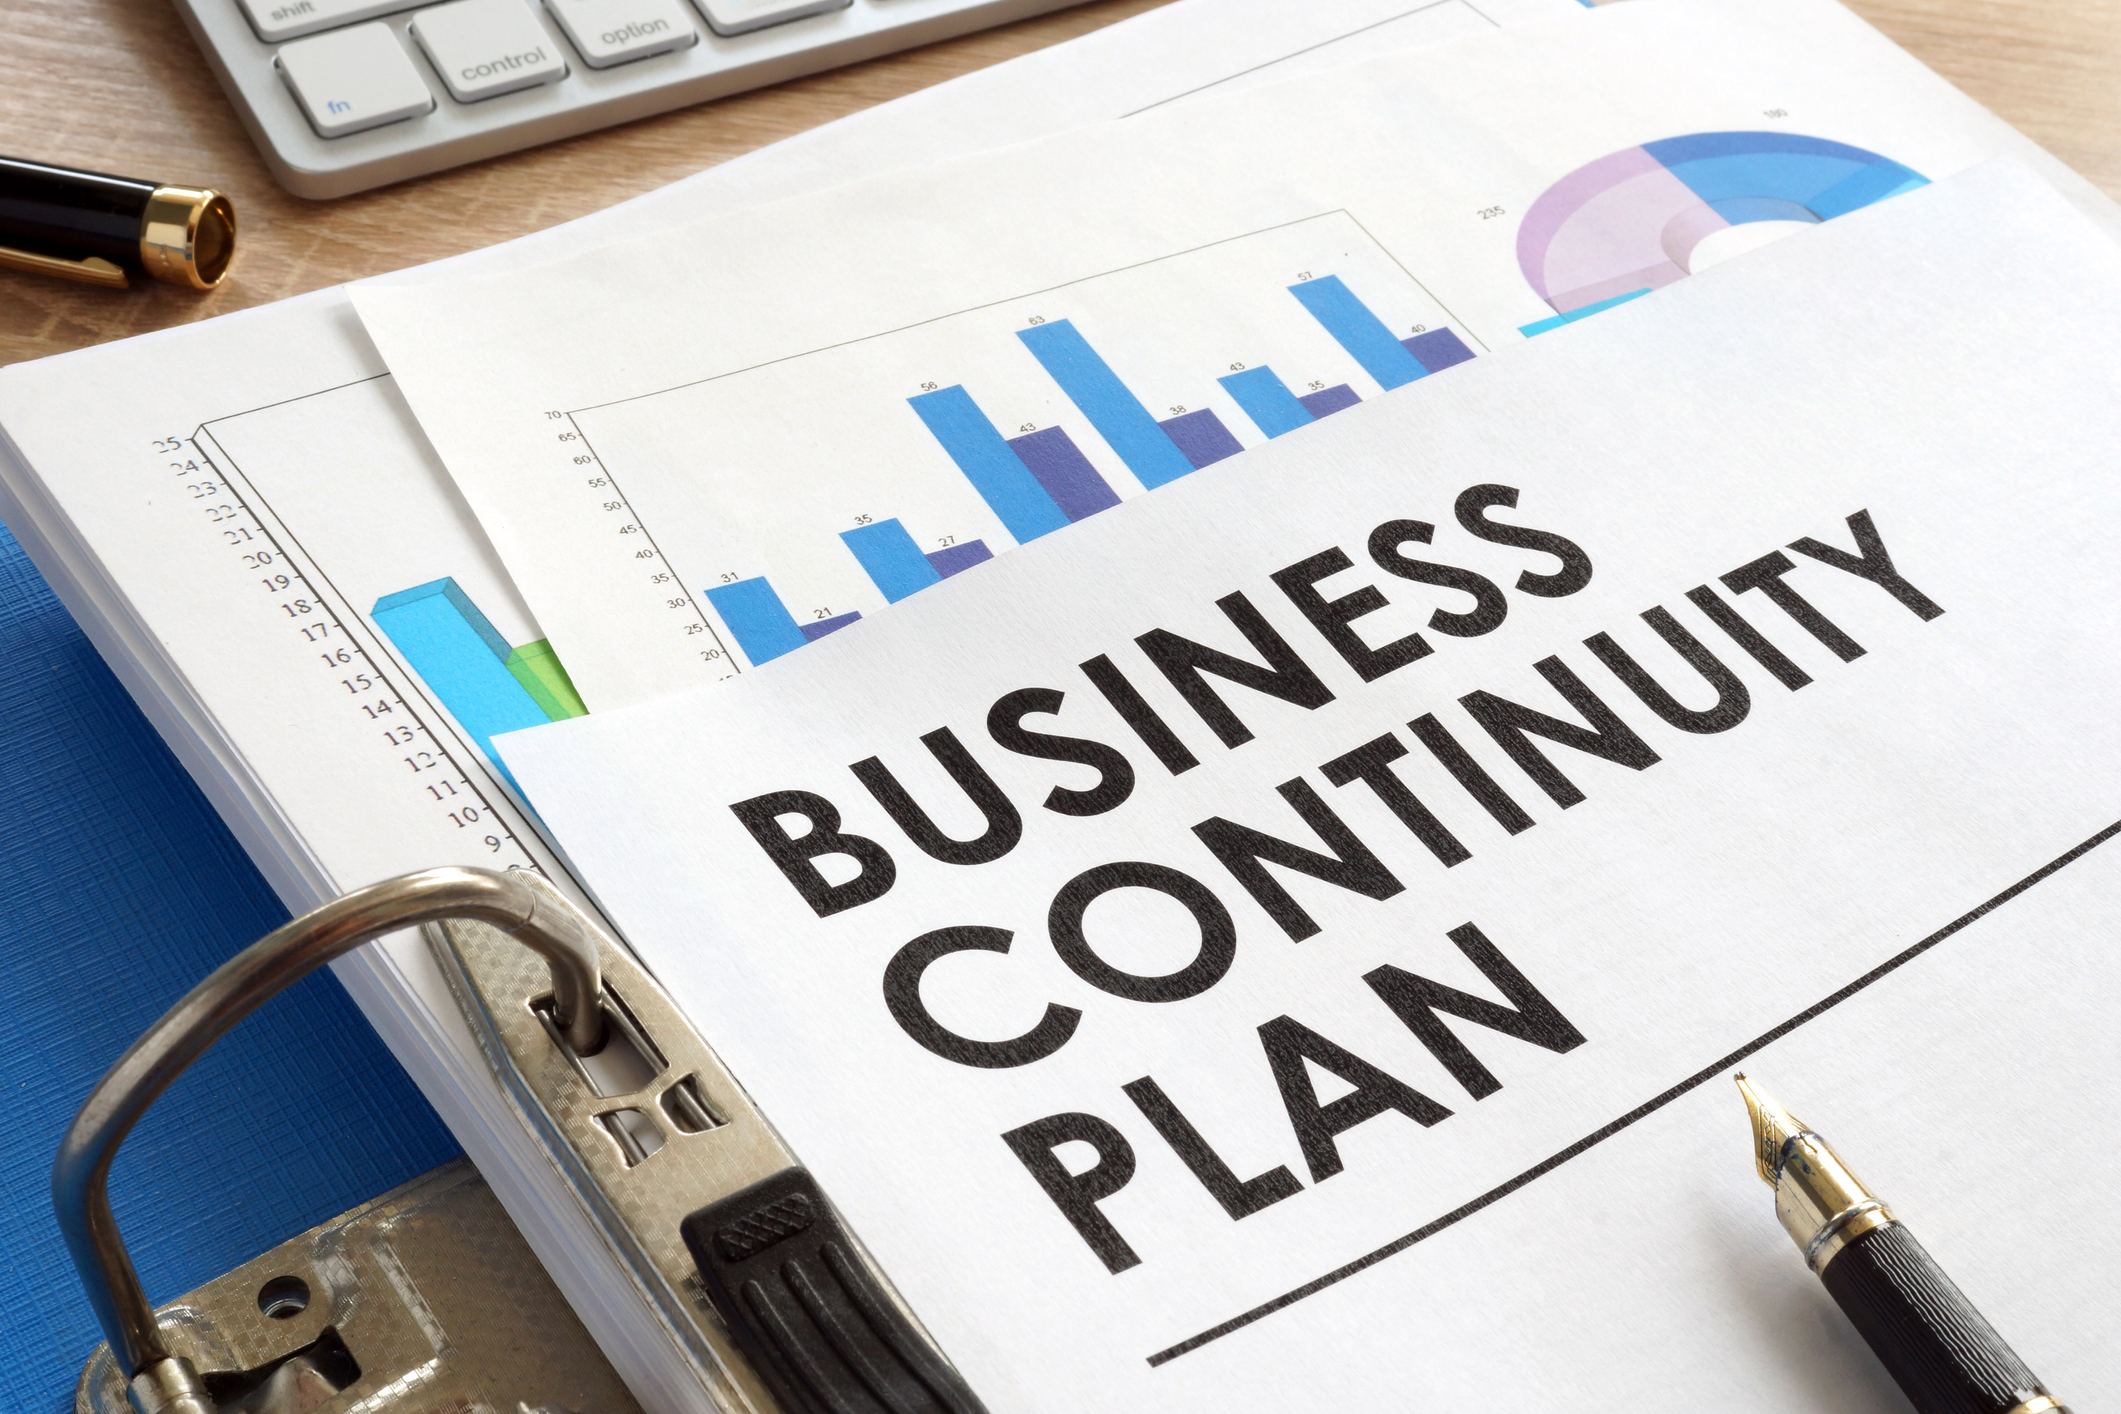 purpose of business continuity management plan